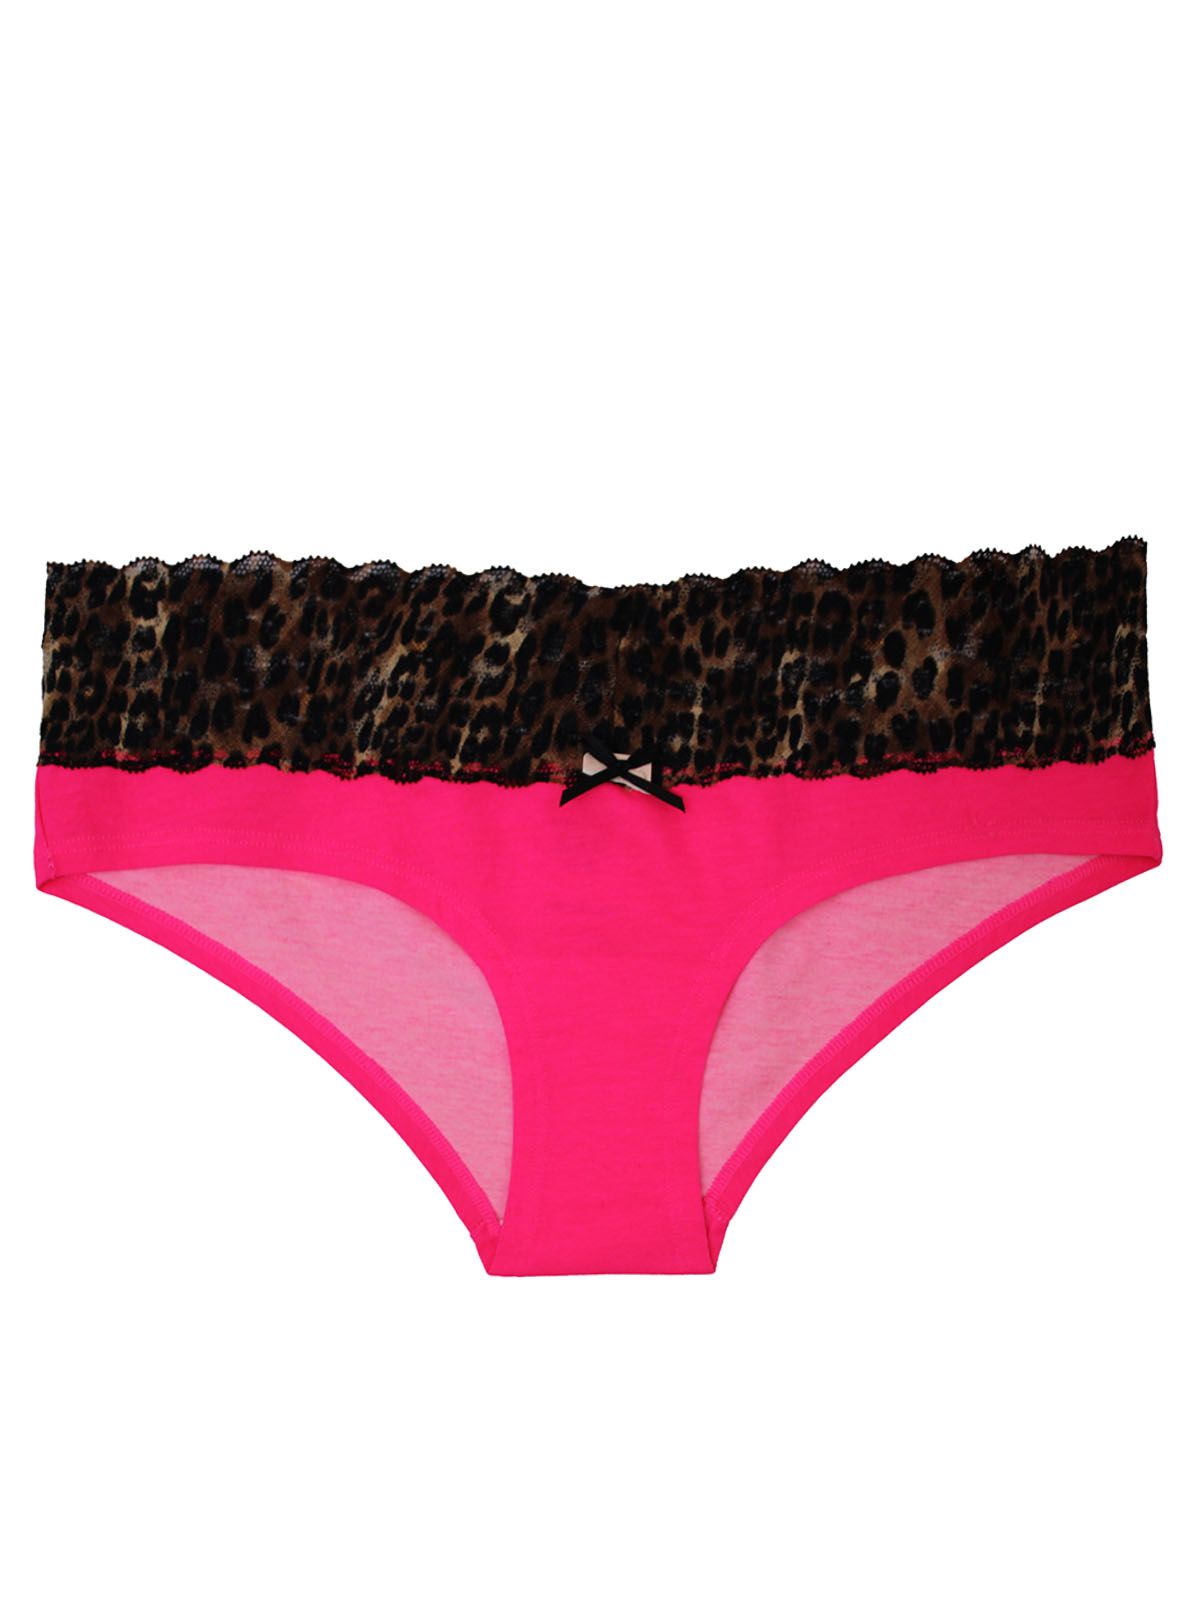 ST. EVE LACE Trim Color Dot Hipster Panty Panties Briefs Pink Size Small  $11.99 - PicClick